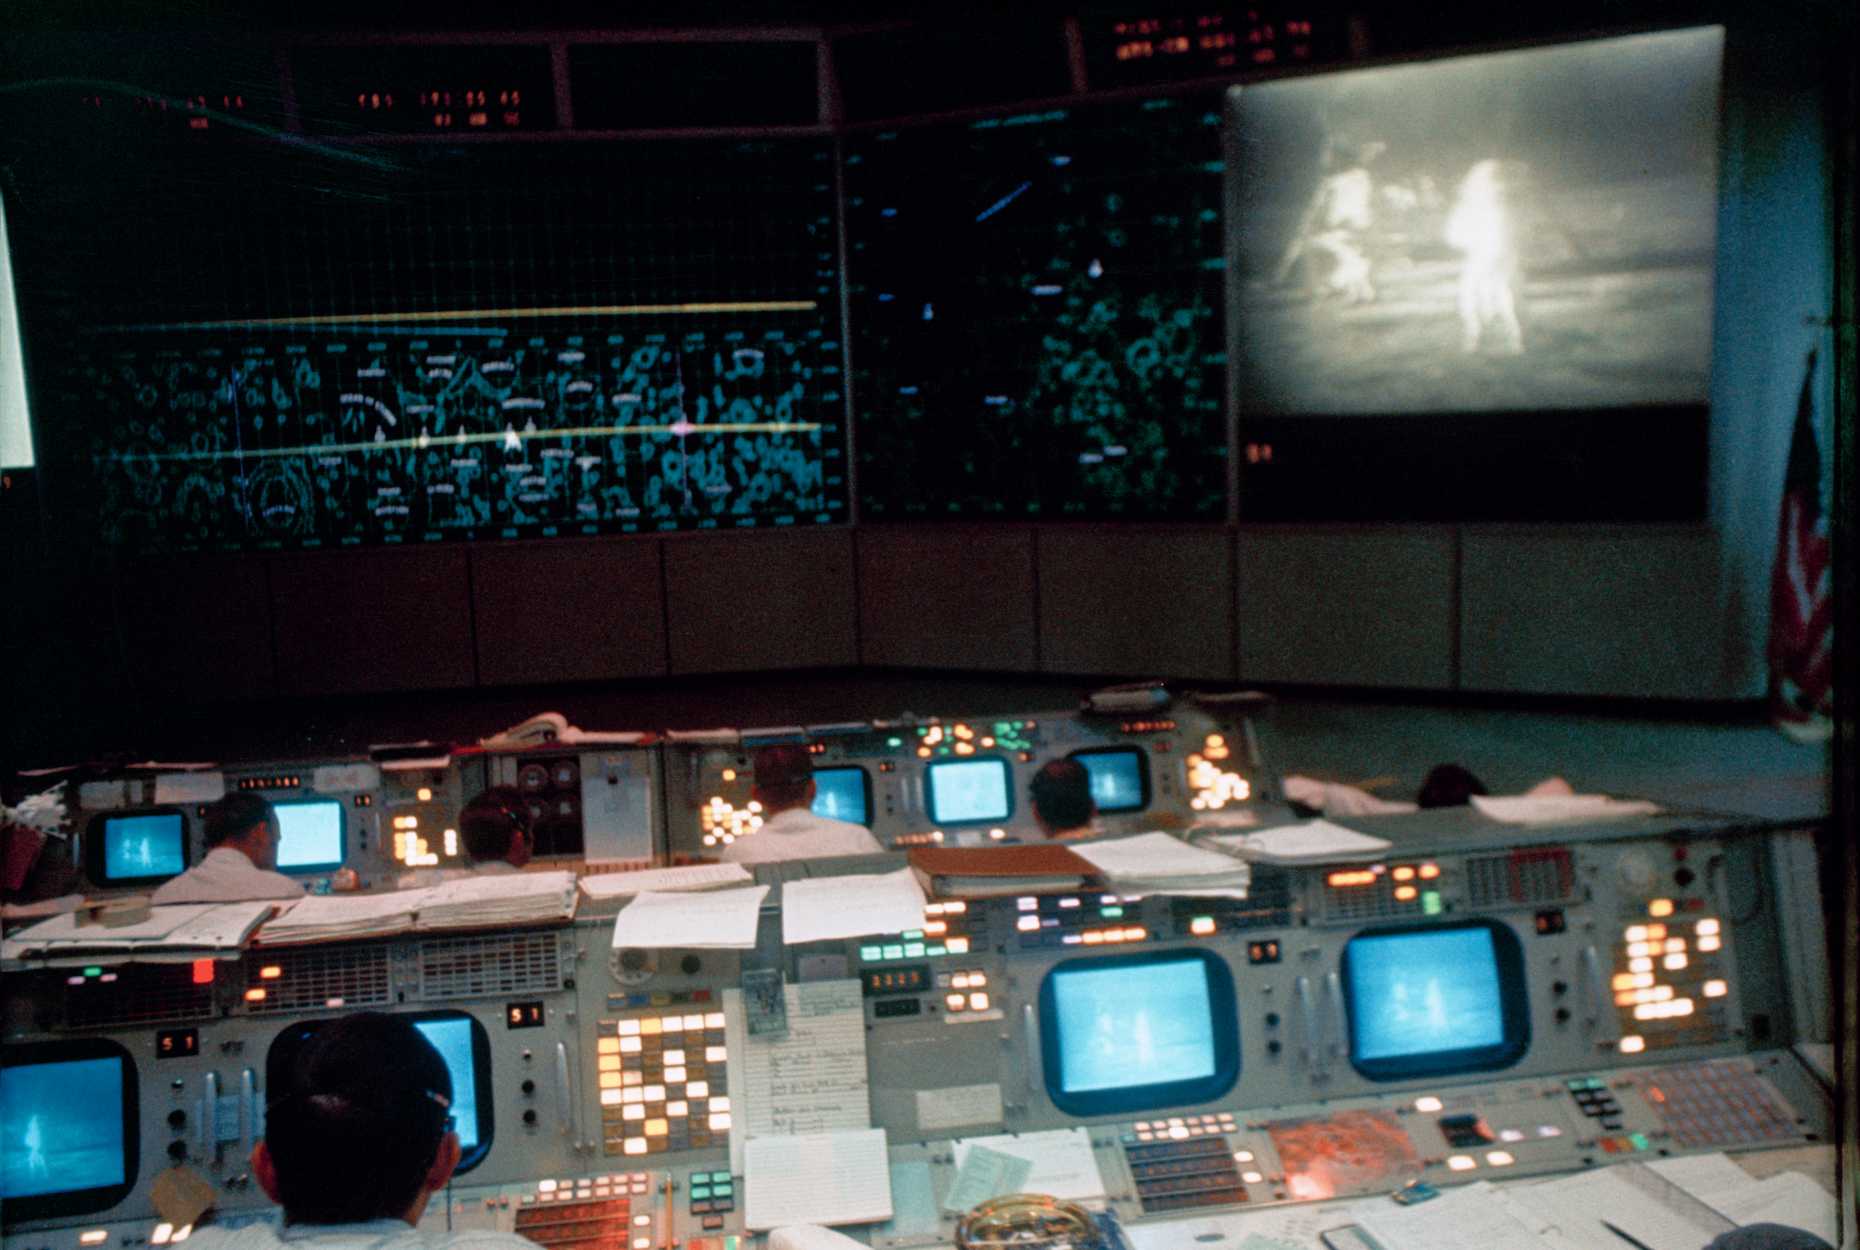 Enlarged view: 20 July 1969 at the NASA Mission Control Center in Houston: An Eidophor device projects the television image of Neil Armstrong and Buzz Aldrin on the moon. (Photo: NASA)